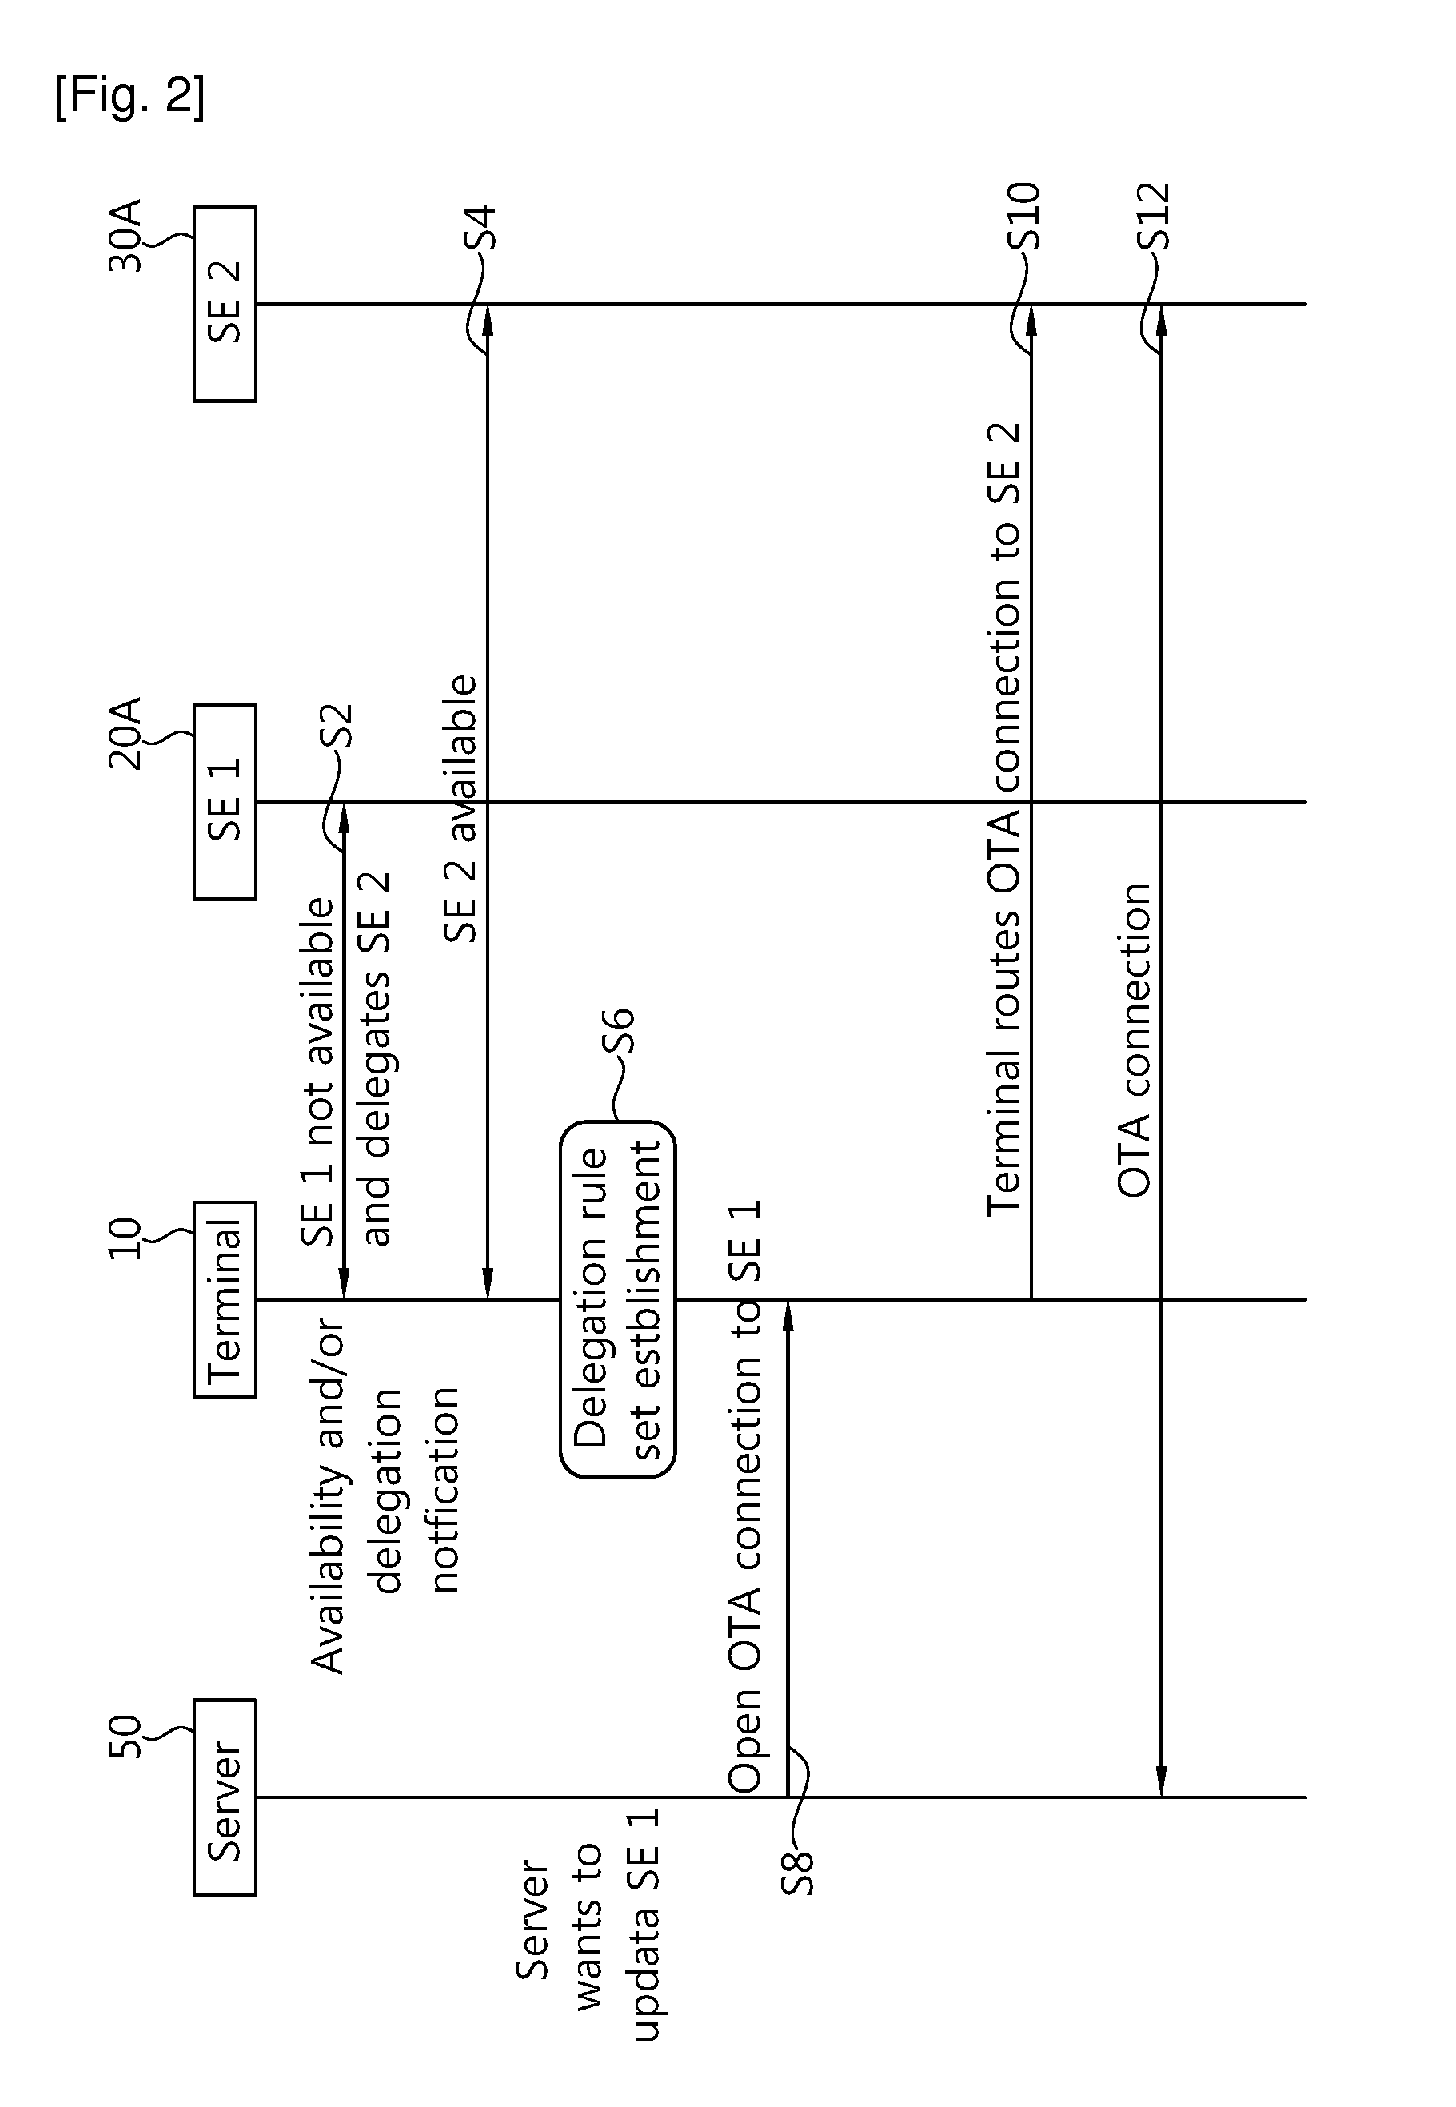 Terminal and method for managing secure devices